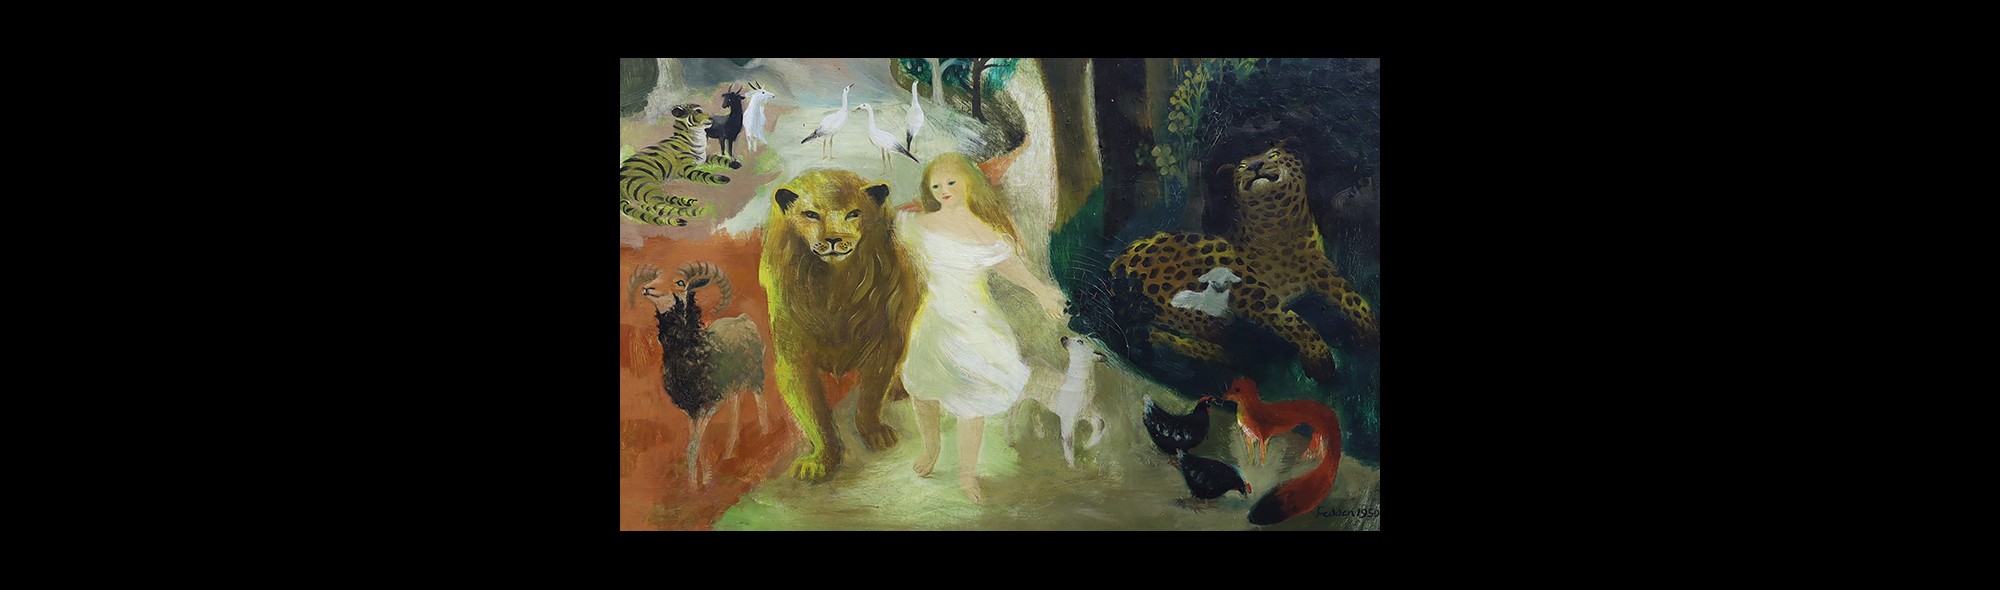 The Lion and the lamb' by Mary Fedden